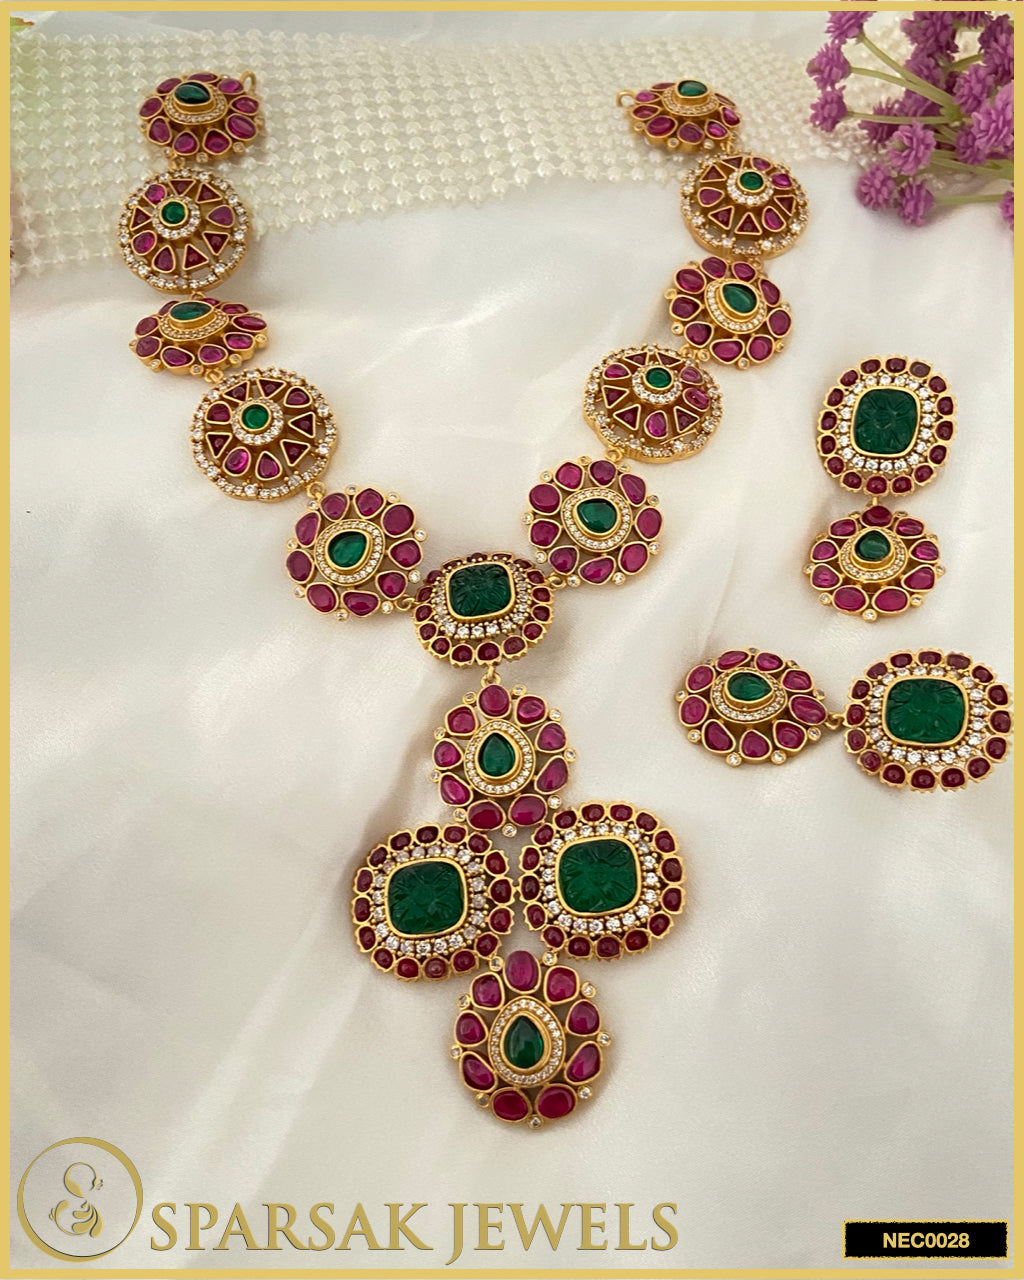 Gold Polished Kundan Necklace Set in Silver with Cubic Zirconia, Ruby, Emerald, and Carved Gemstones by Sparsak Jewels